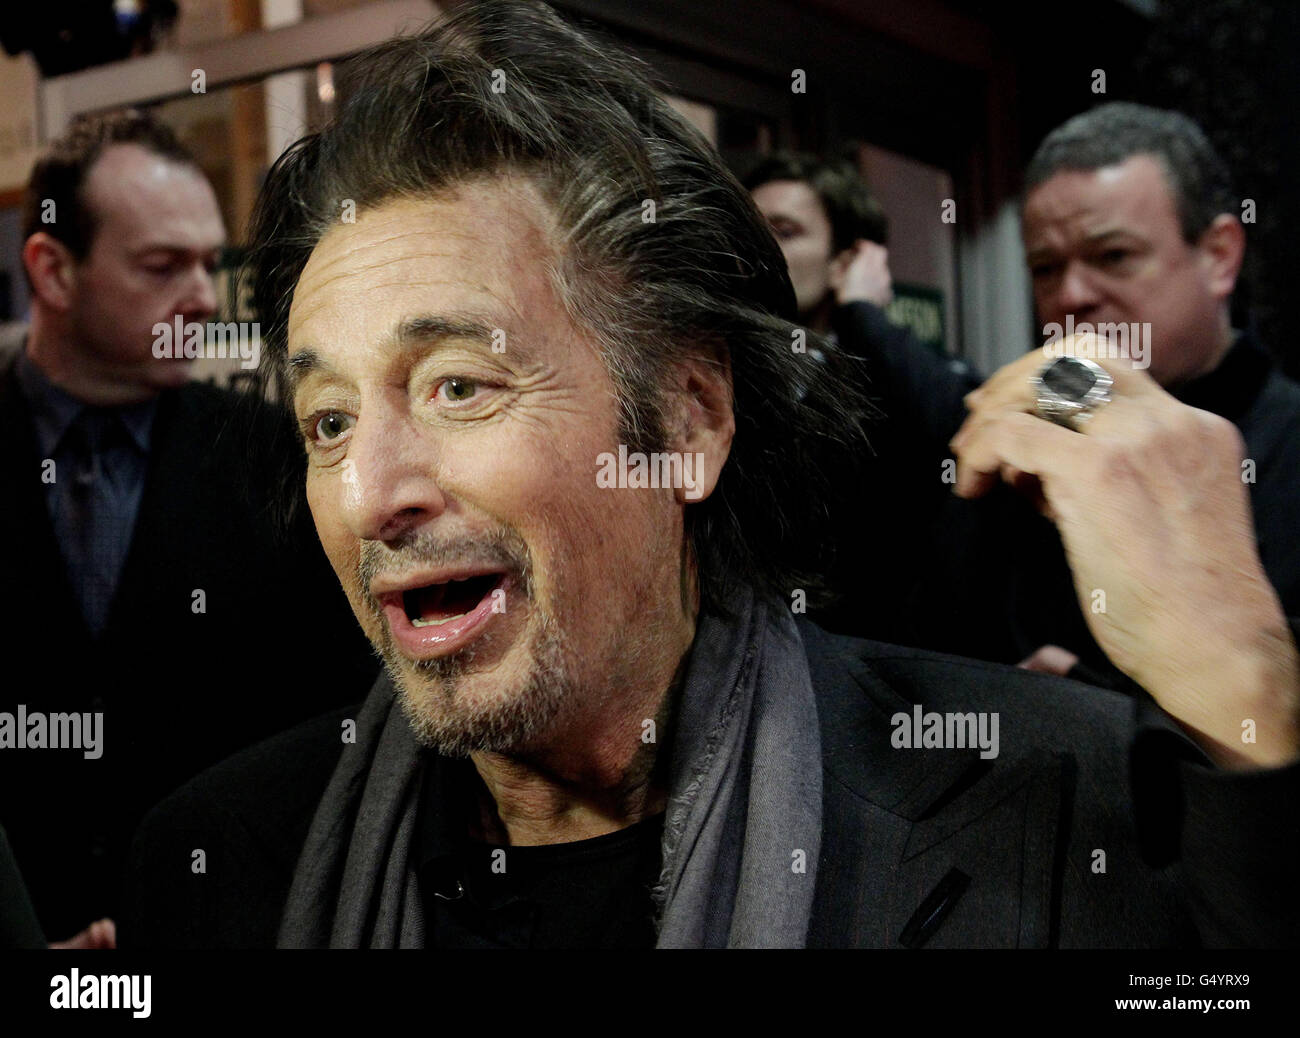 Al Pacino attends the Jameson Dublin film festival showing of Wilde Salome at the Savoy Cinema. Stock Photo